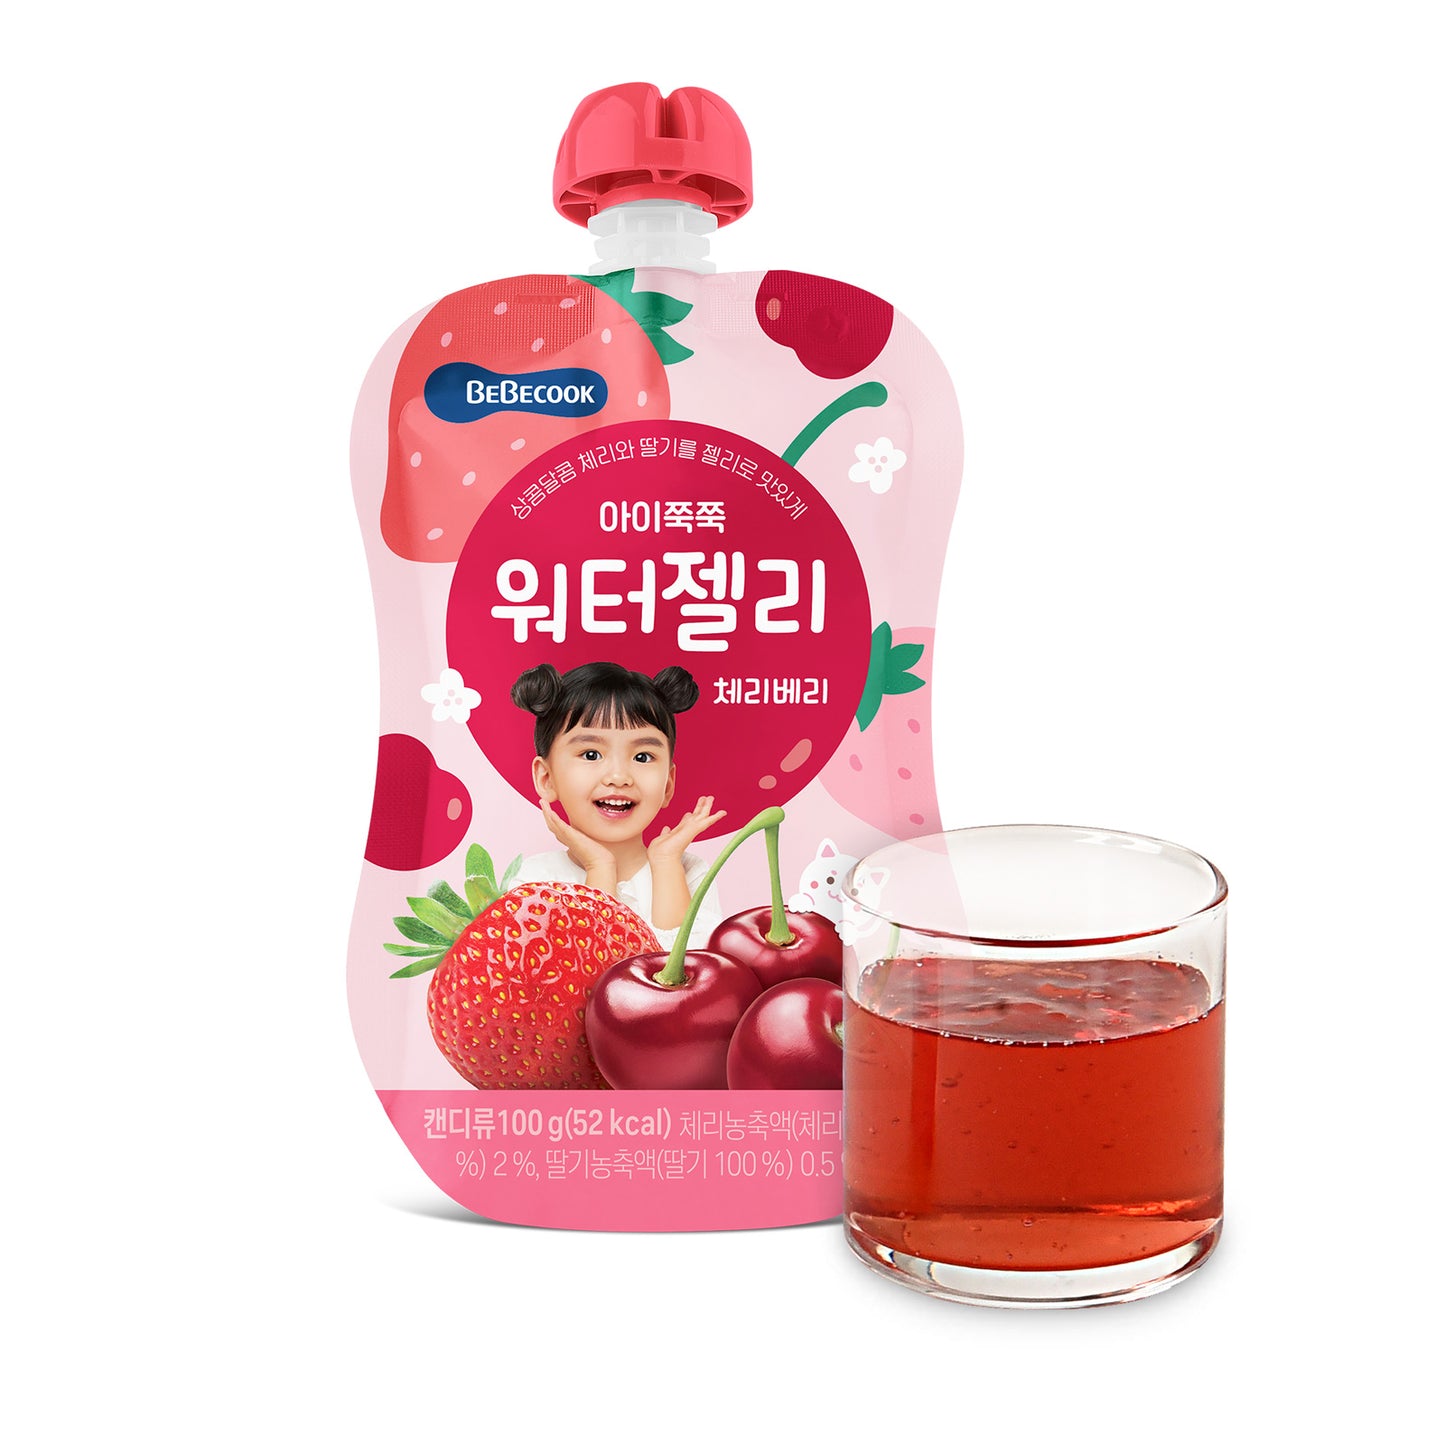 BeBecook - 10 x My First juicy Jelly Drink (Strawberry & Cherry)